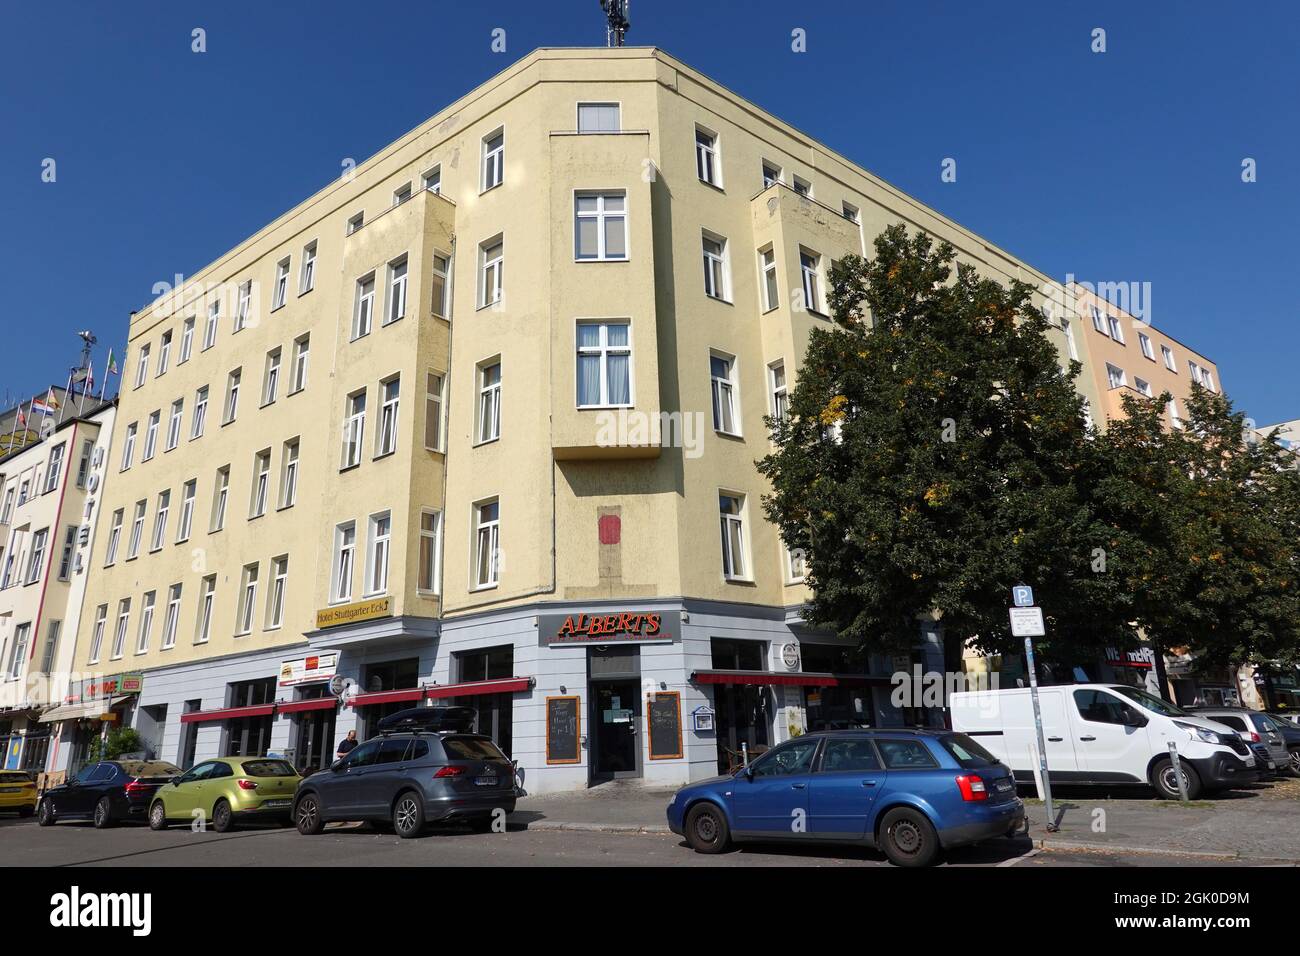 Berlin, Germany. 08th Sep, 2021. The building on the corner of Stuttgarter Platz and Kaiser-Friedrichstraße in the Charlottenburg district. In 1968, the former rooms of 'Kommune 1' (K1) were located here - a politically motivated residential community of communards that was intended as a counter-model to the bourgeois nuclear family. Credit: Kathrin Deckart/dpa/Alamy Live News Stock Photo